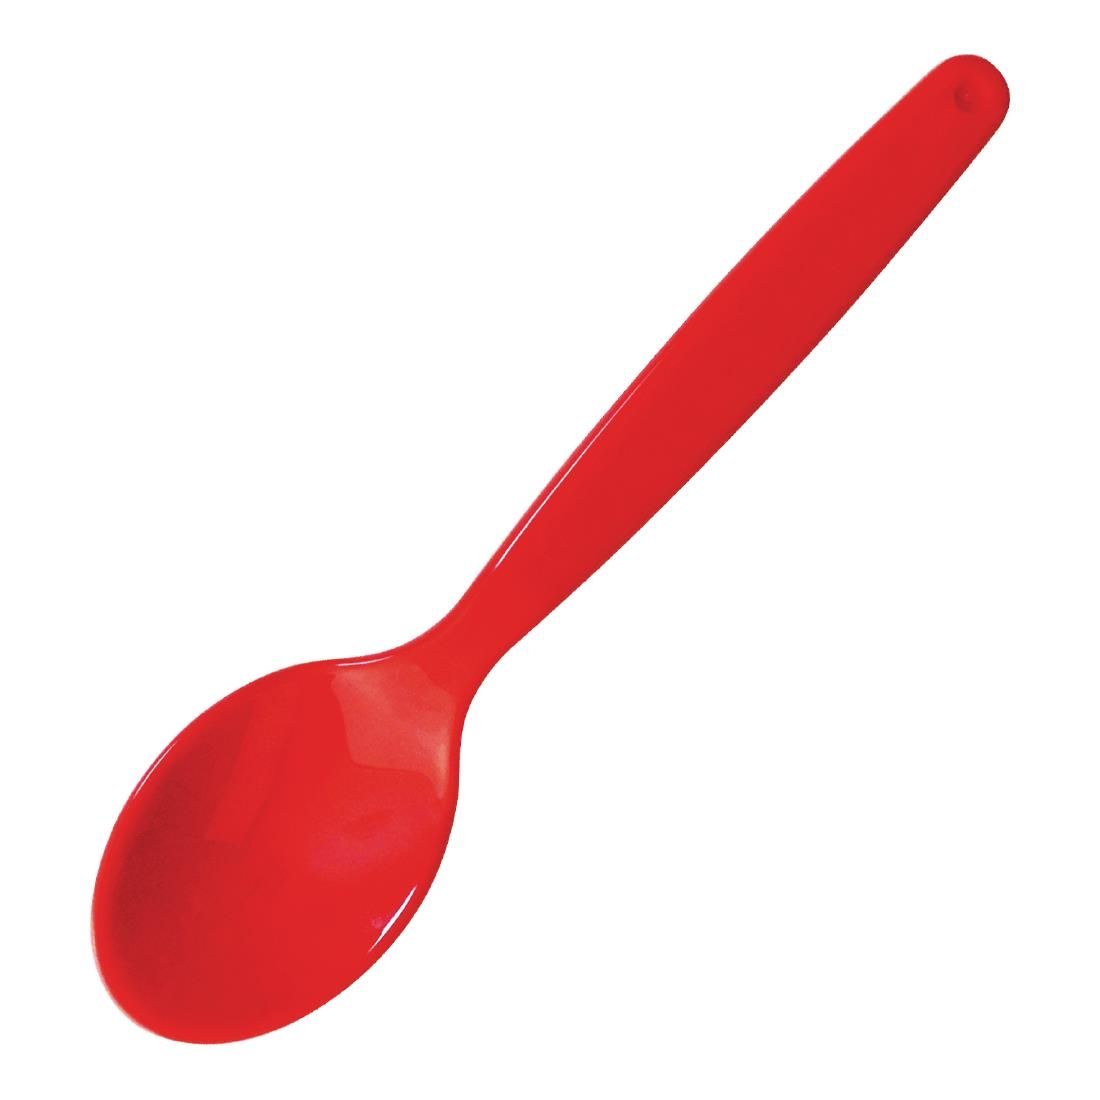 DL122 Polycarbonate Spoon Red Kristallon (Pack of 12) JD Catering Equipment Solutions Ltd